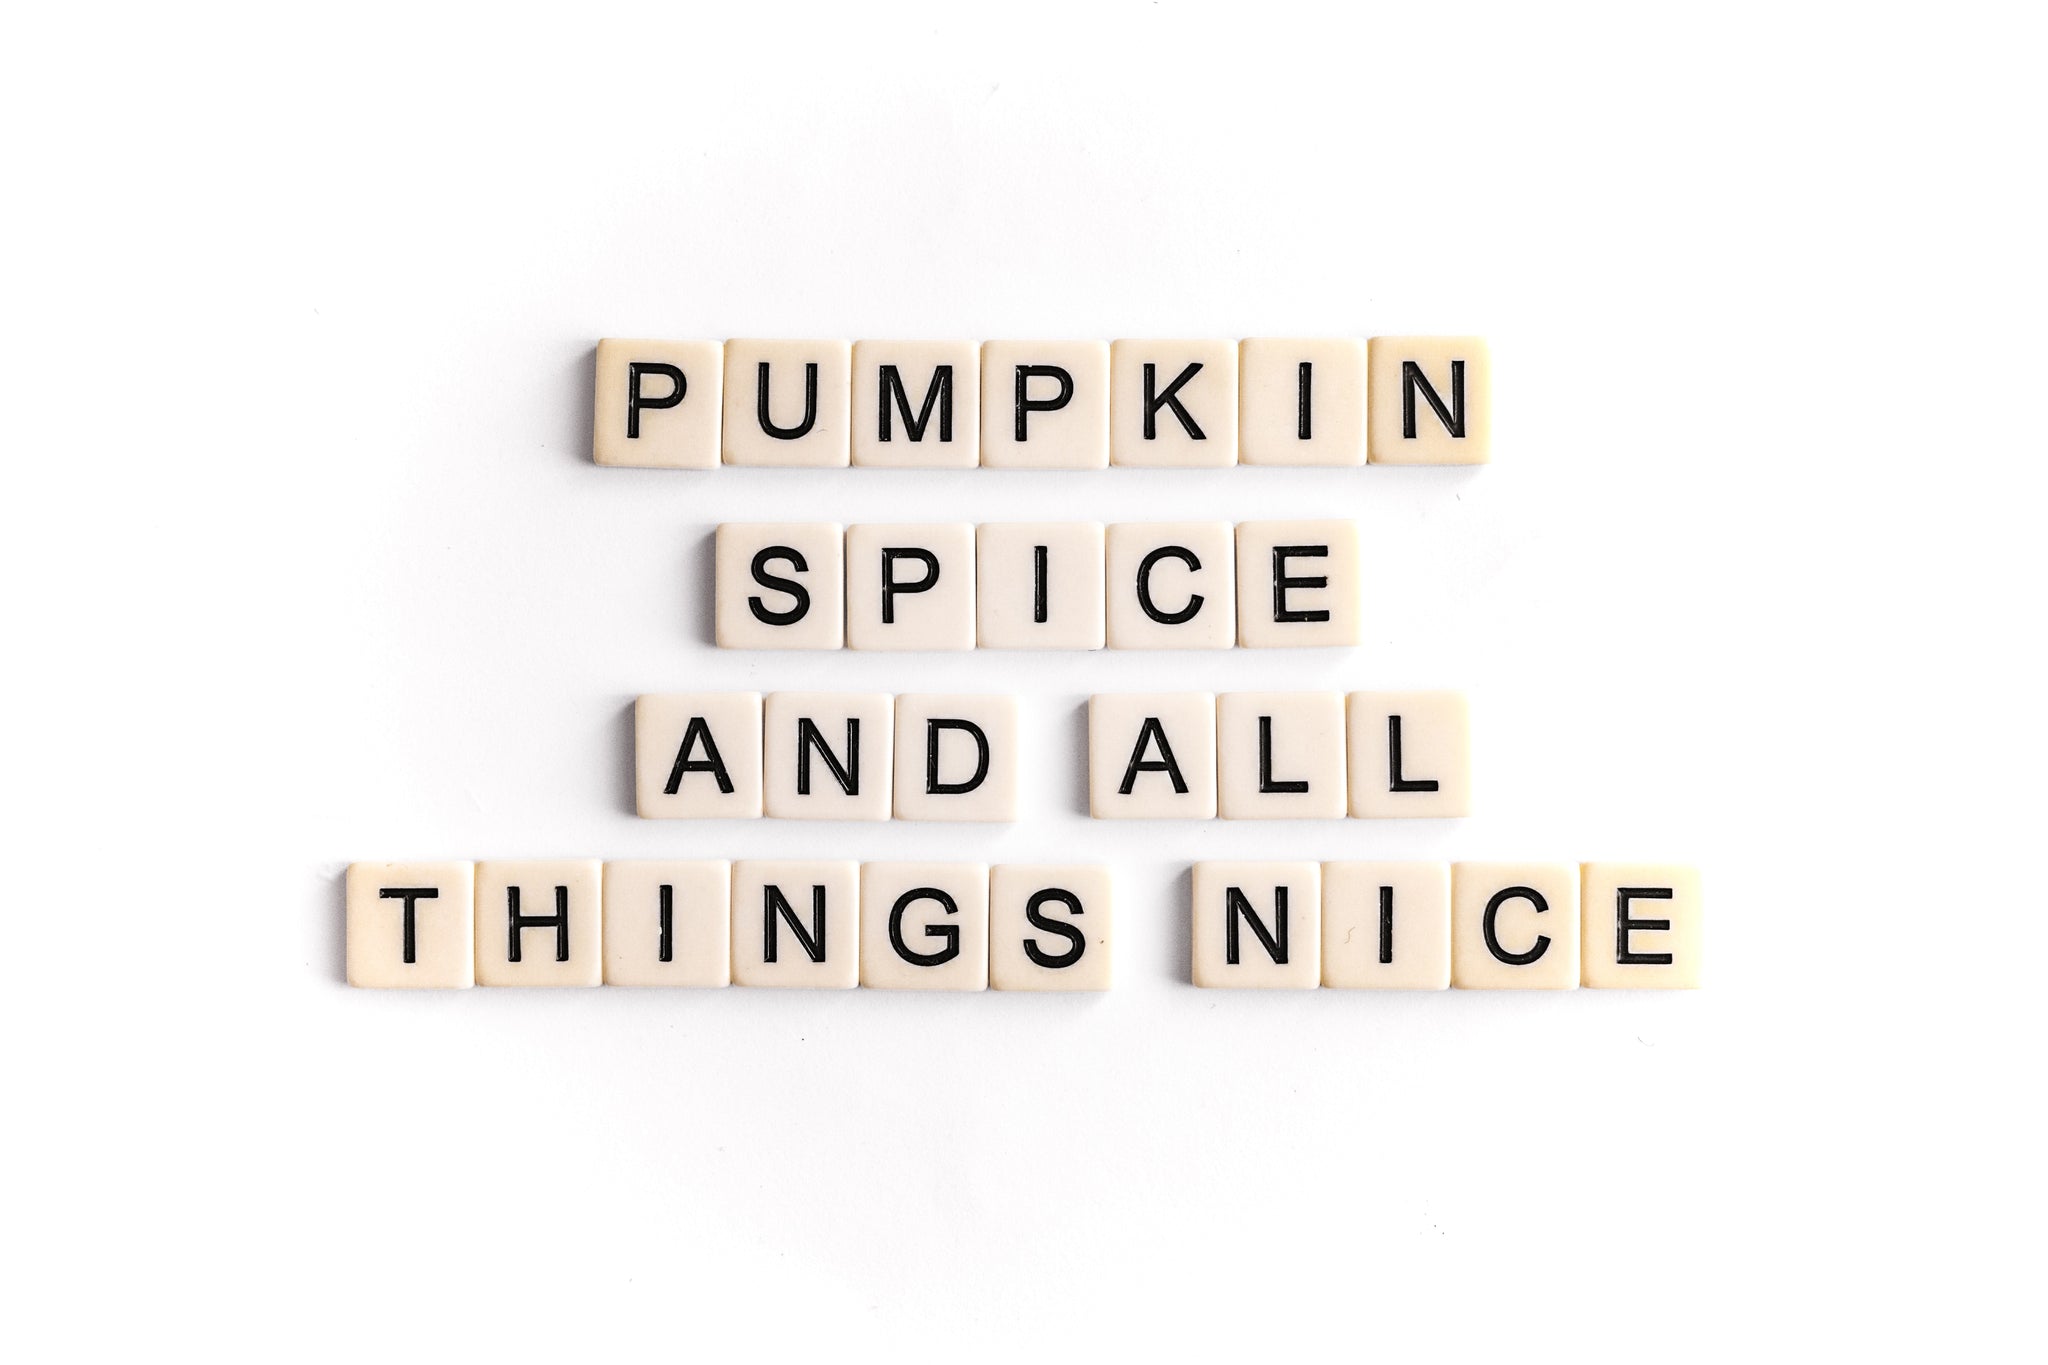 How to Use Pumpkin Spice Syrup